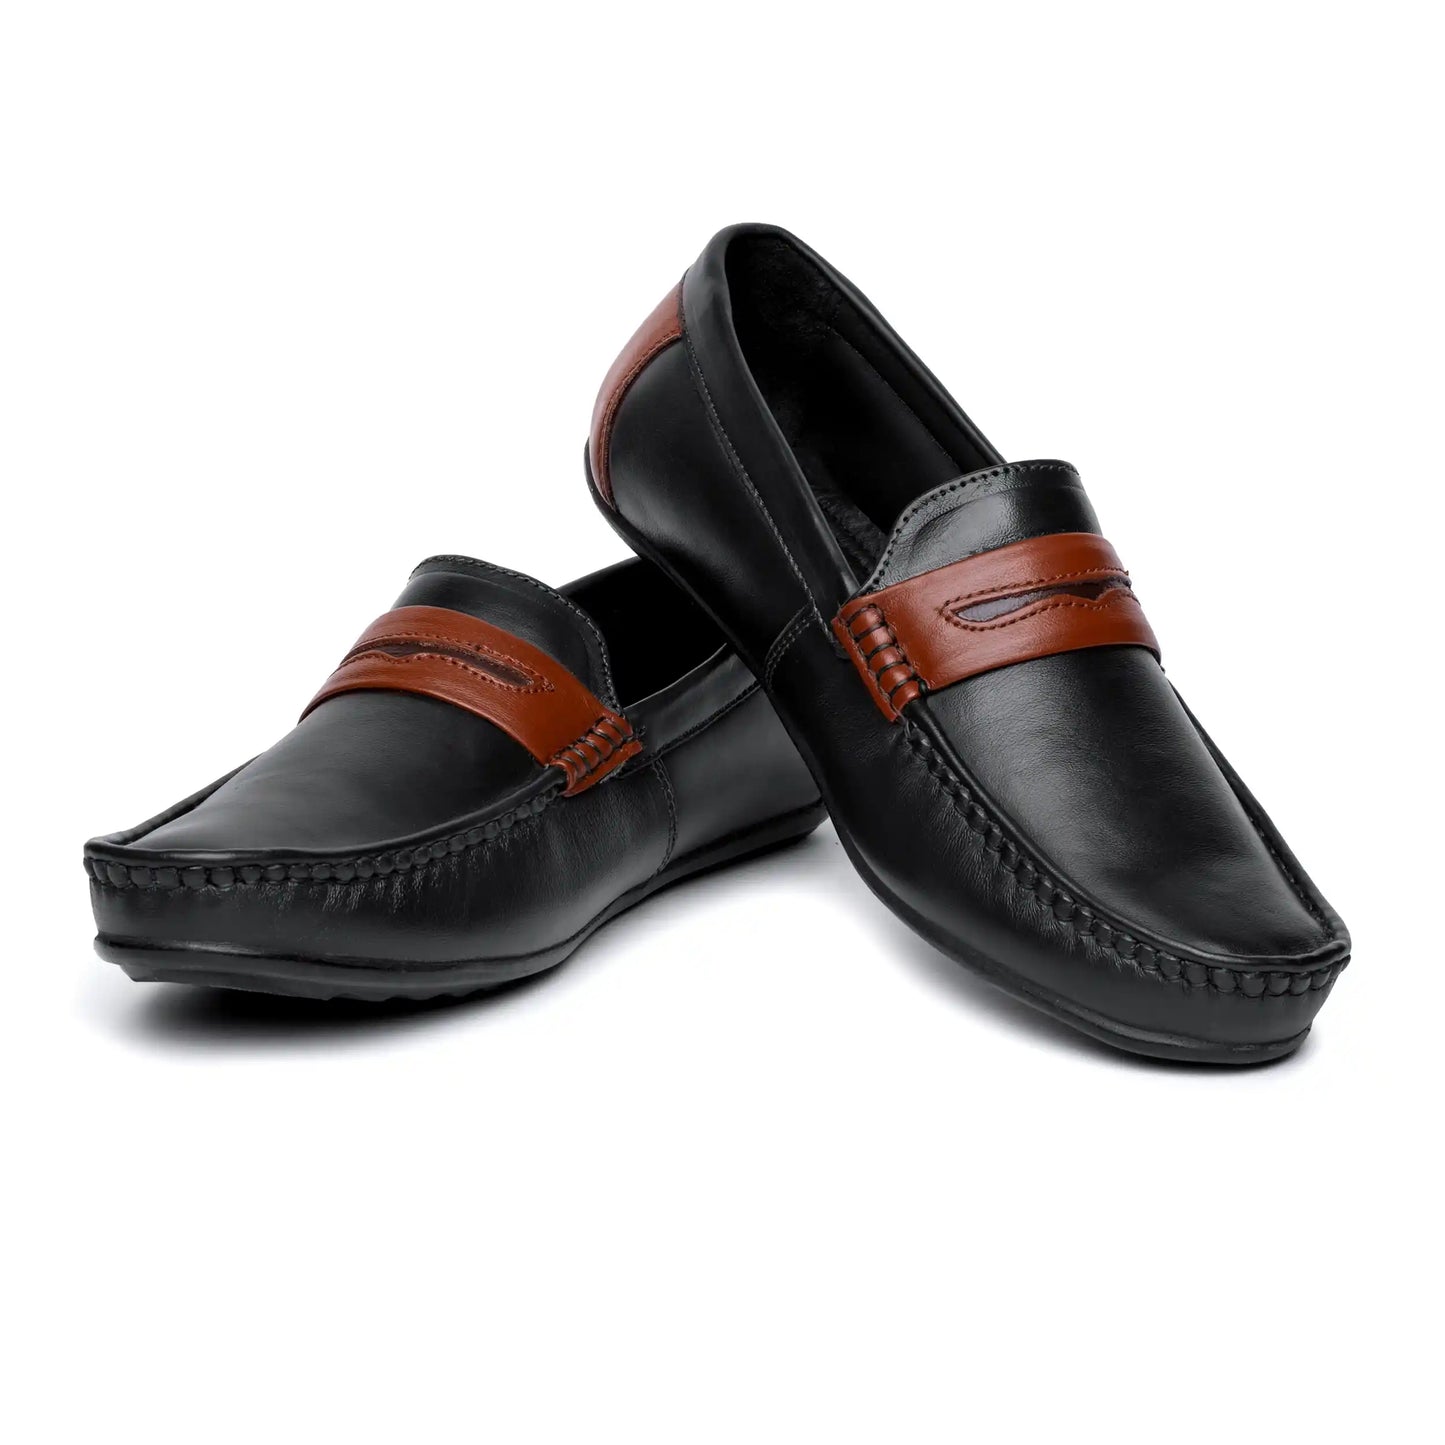 Genuine Leather Casual Loafers for Men